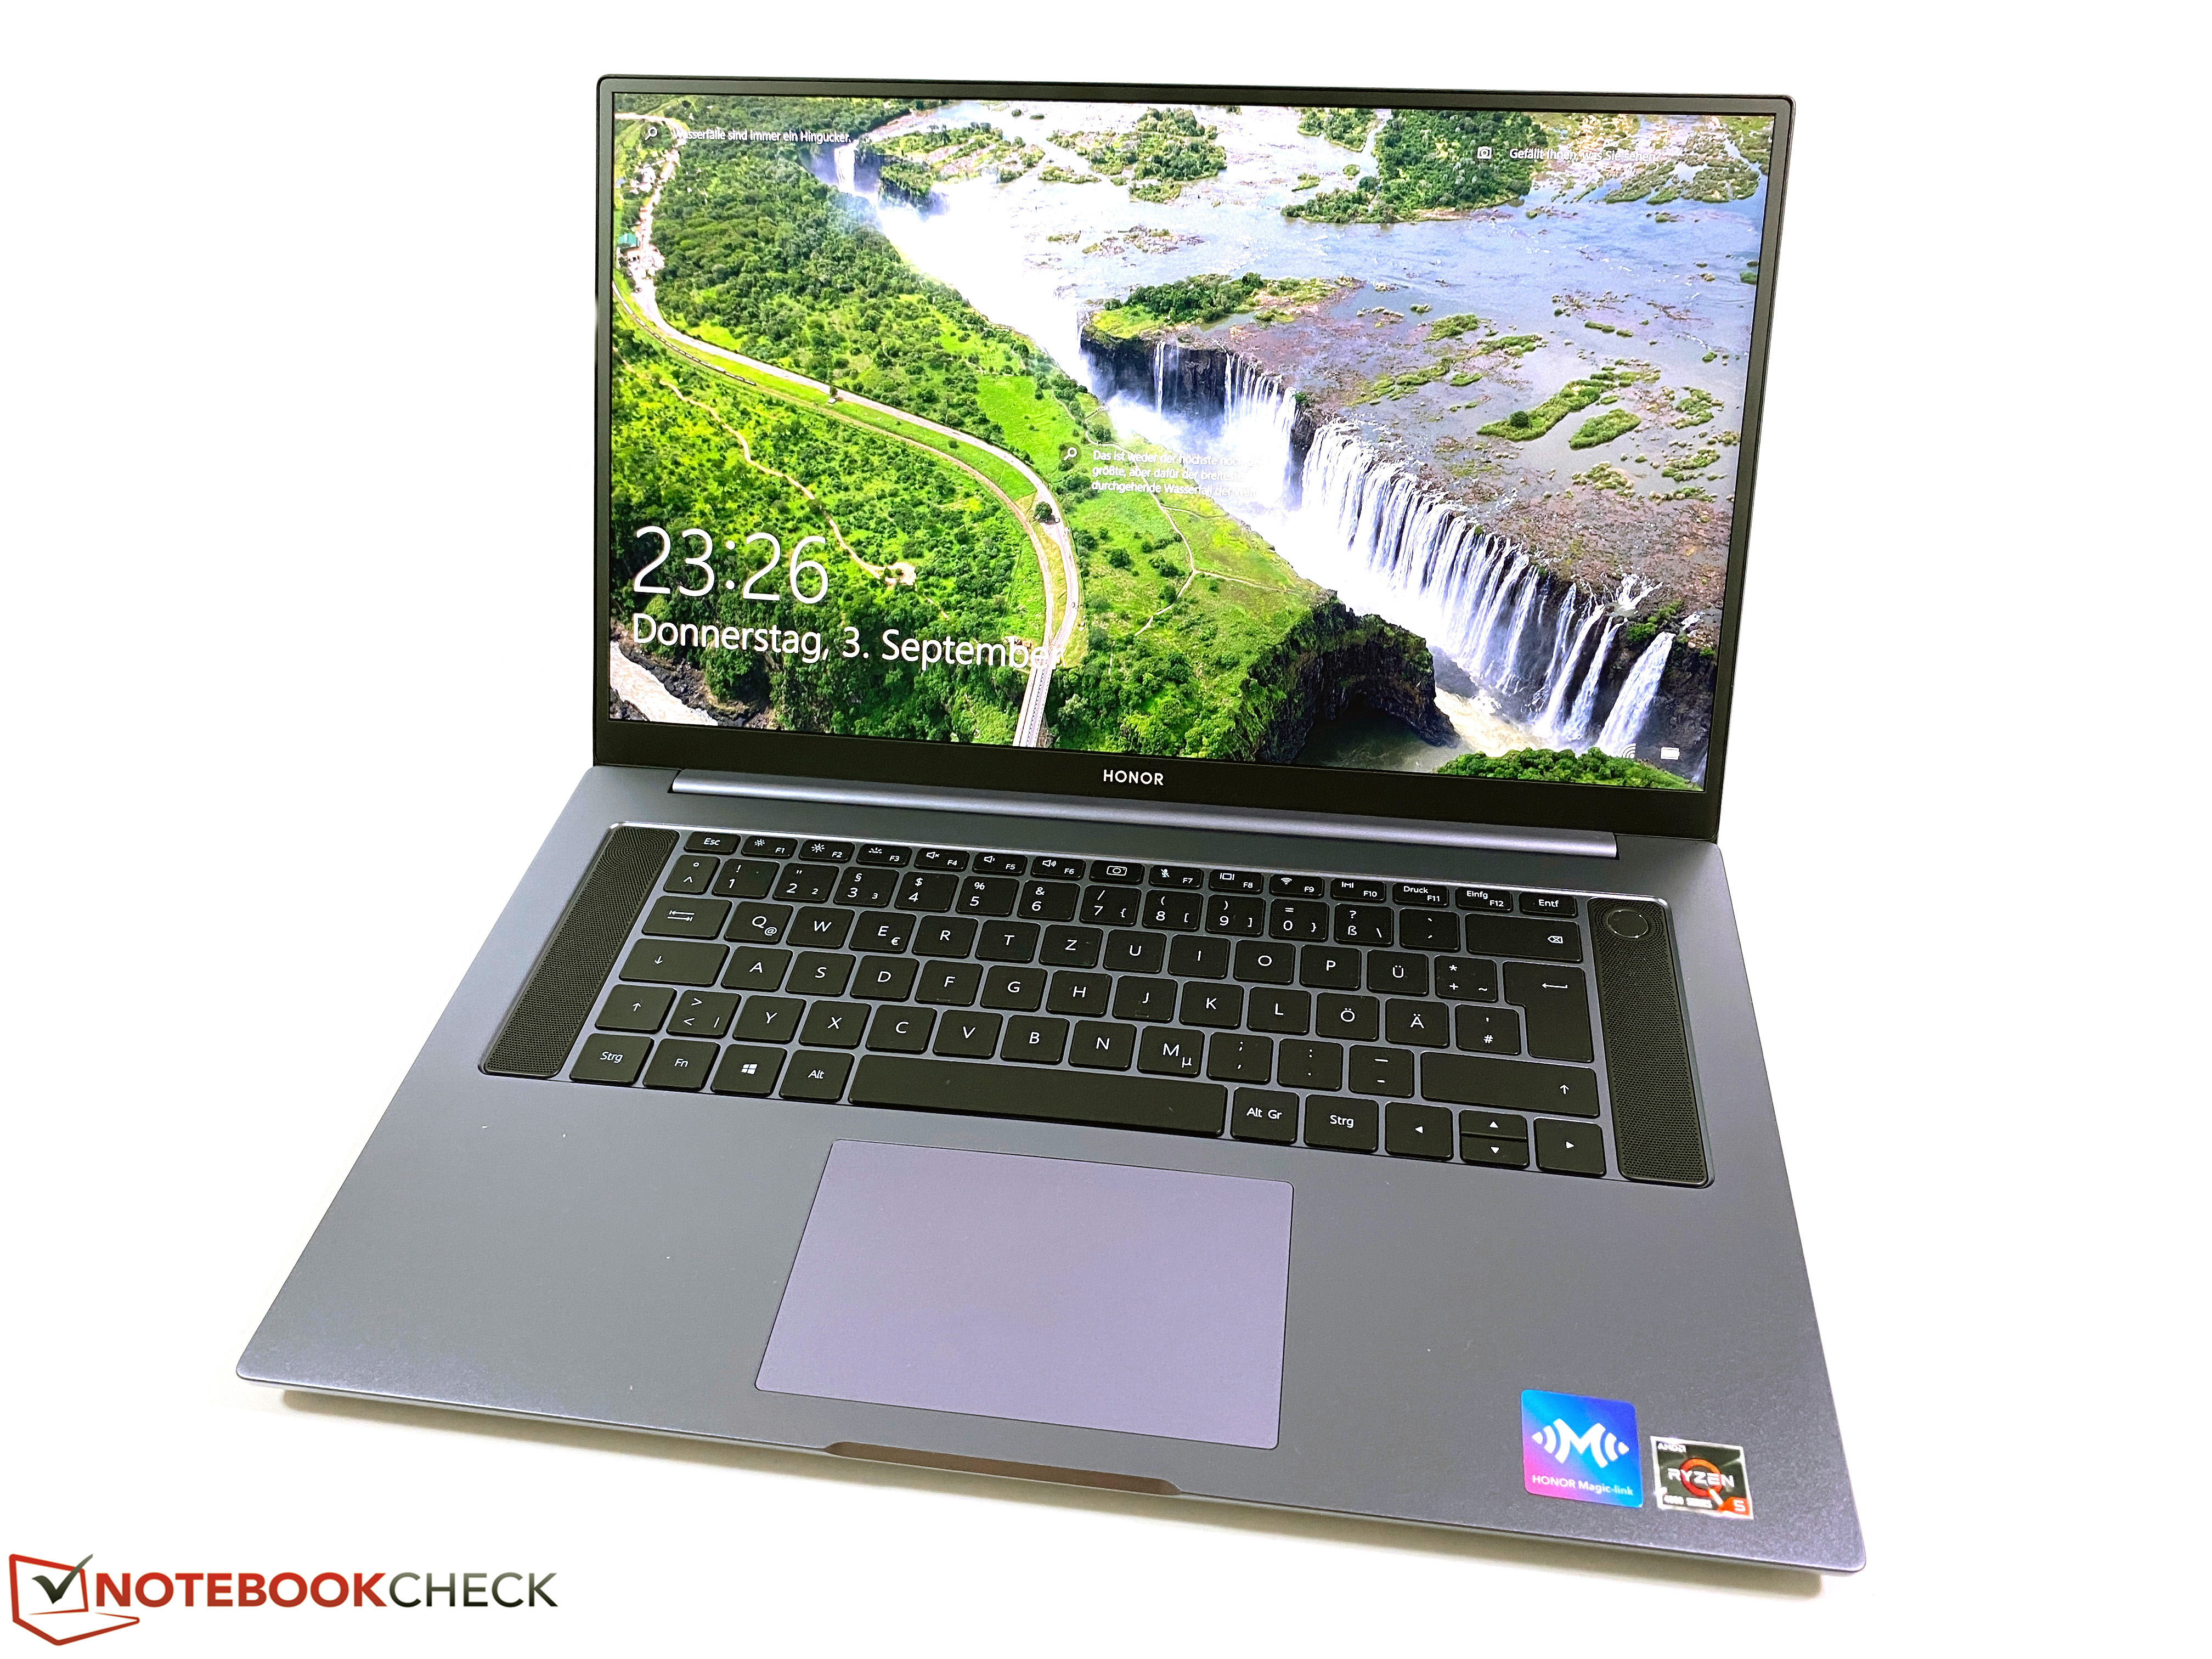 Honor MagicBook X 16 hands-on impression: Cheap family fun